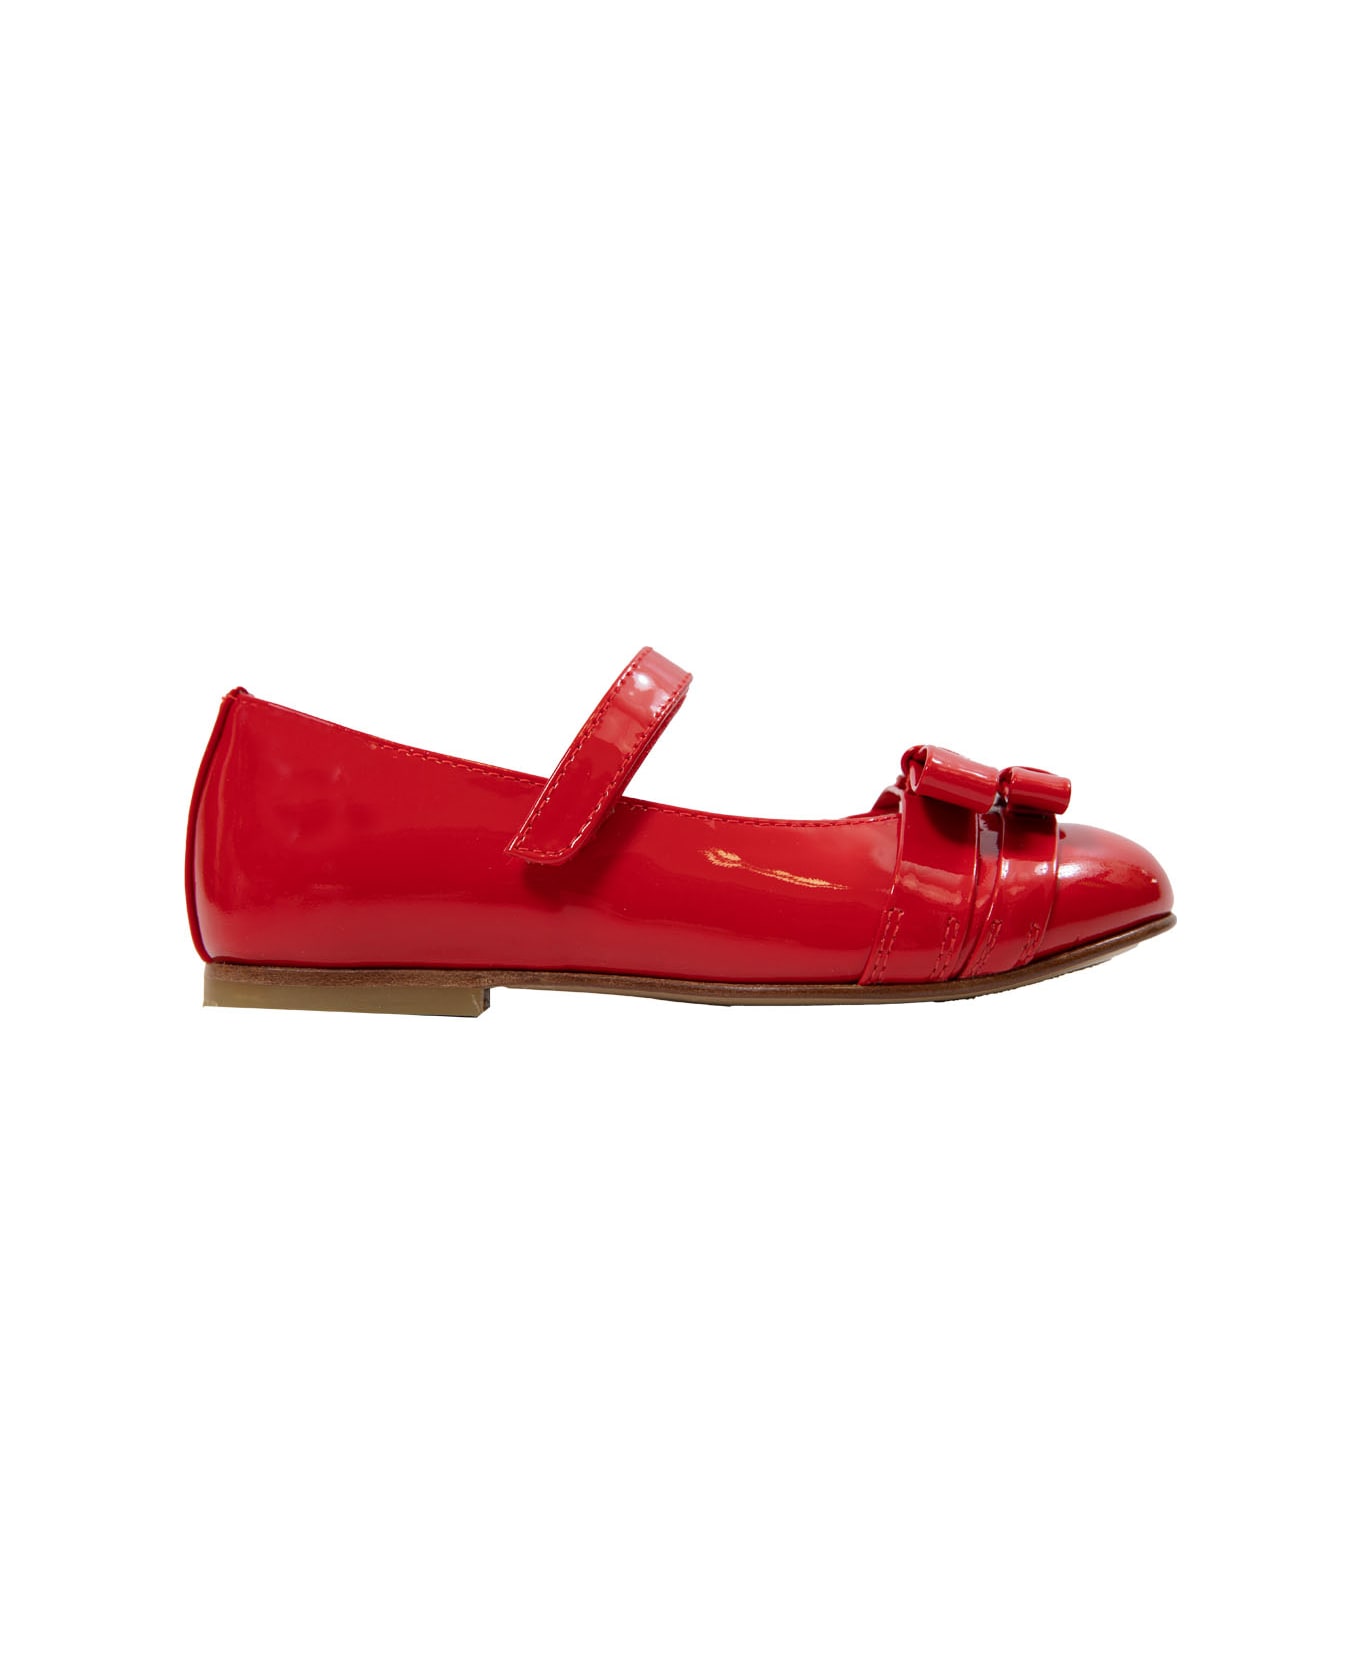 Andrea Montelpare Patent Leather Shoes - Red シューズ